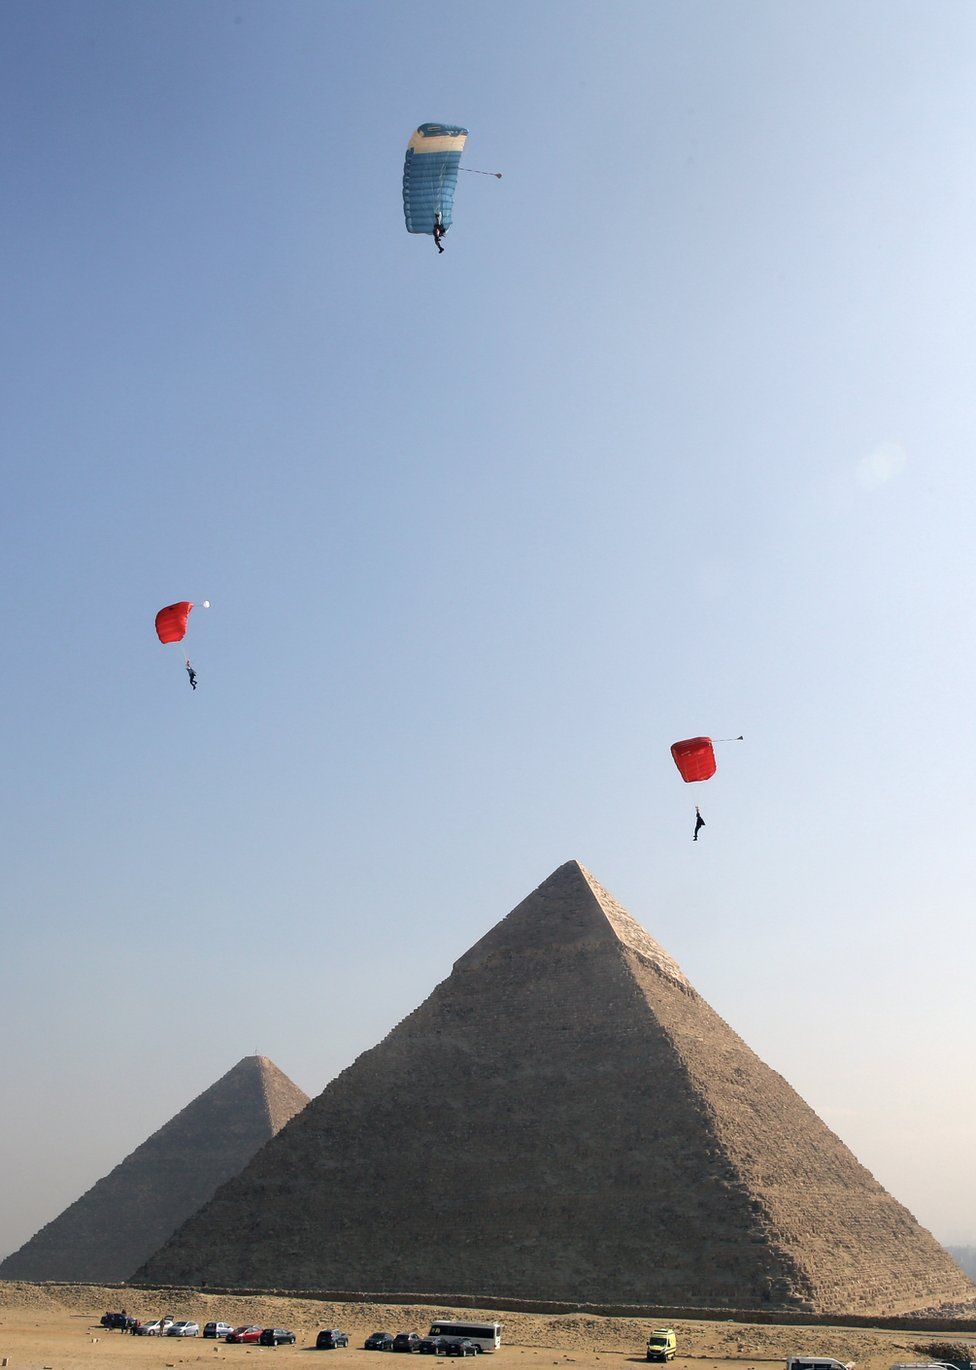 Three powered paragliders take part in the air games festival in front of the Giza pyramid complex, in Giza, Egypt - Monday 19 February 2019